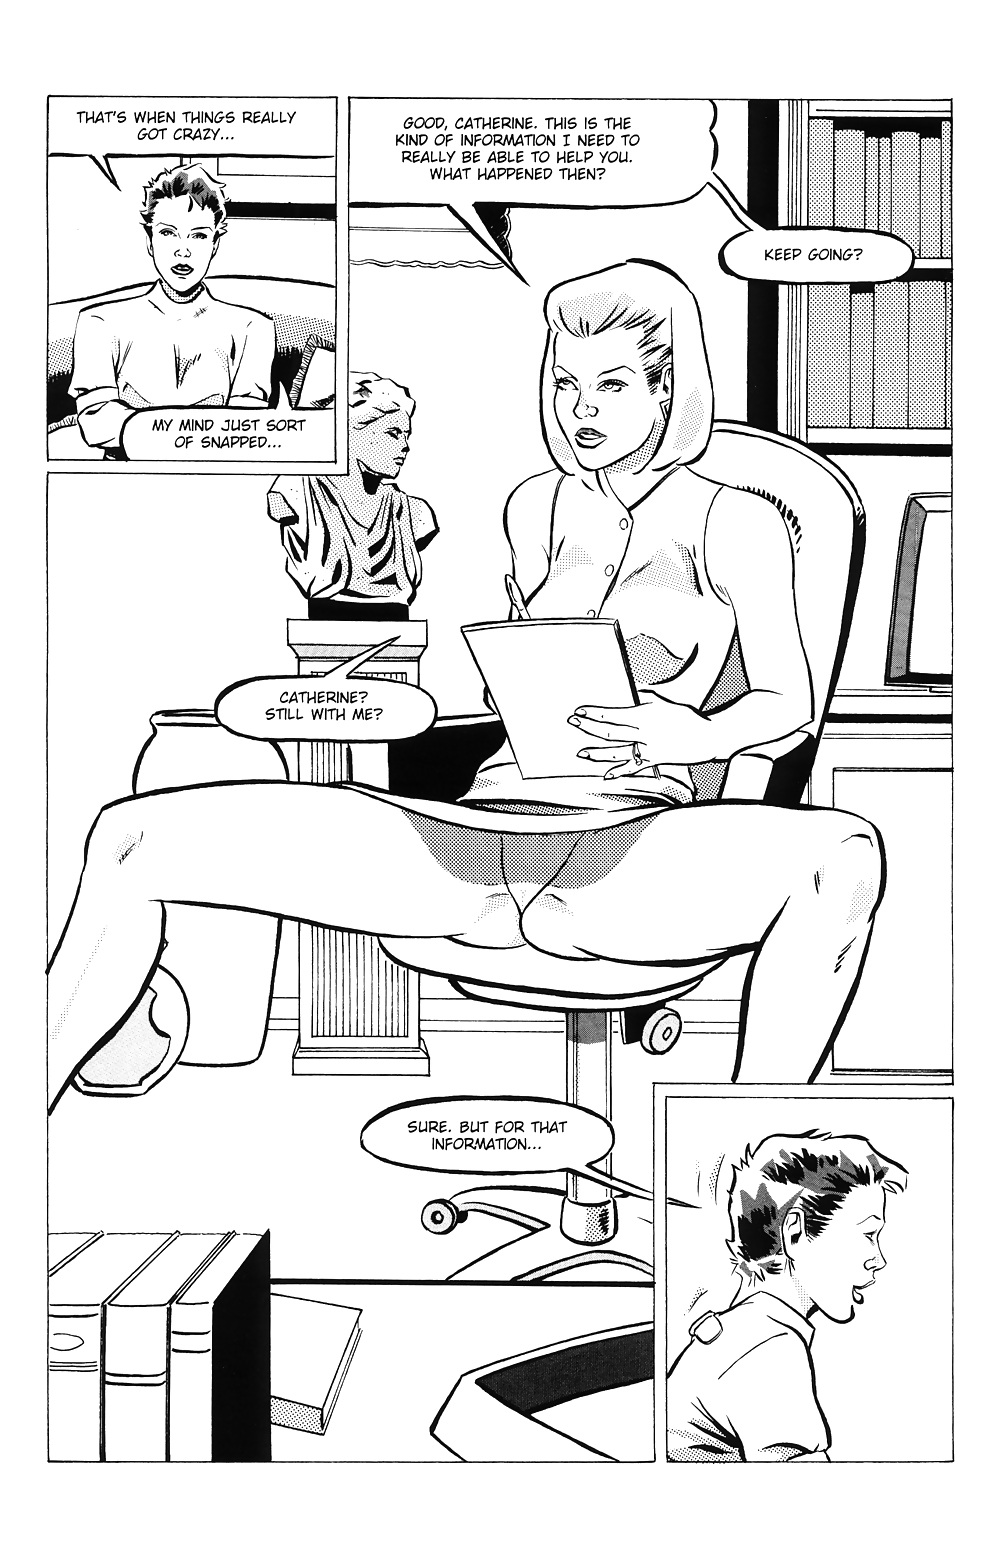 Housewives at Play #04 Special - Eros Comics by Rebecca #24141481